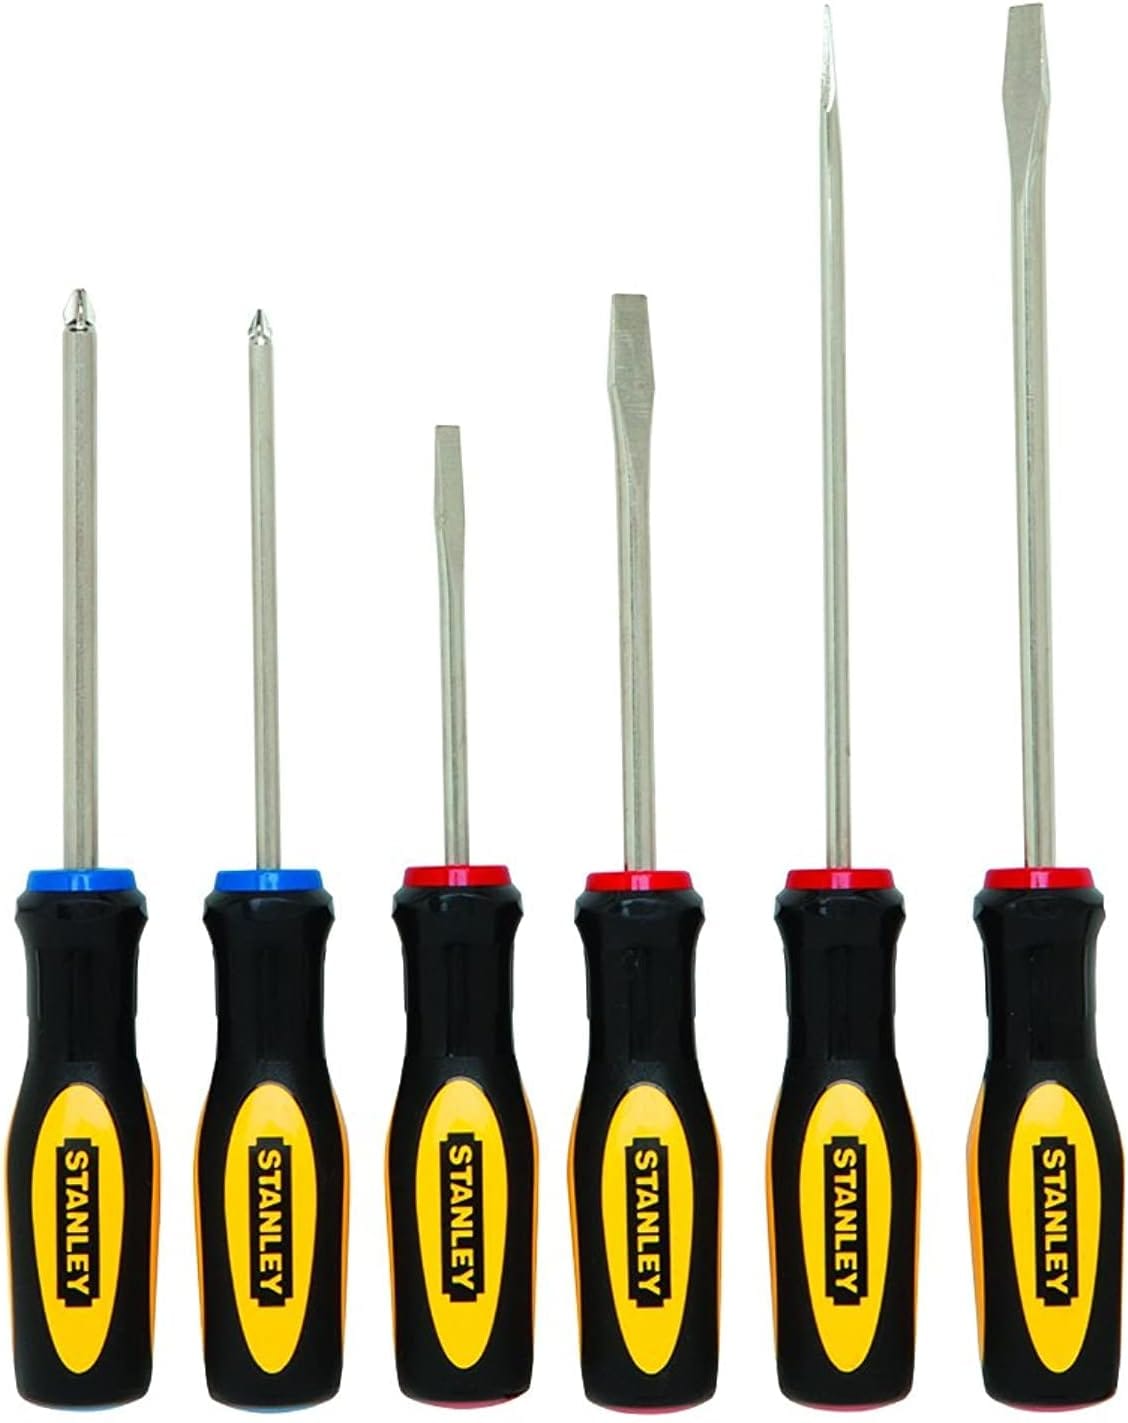 Stanley 6 Pieces Precision Screwdriver Set - STHT66052-8 | Supply Master, Accra, Ghana Level Buy Tools hardware Building materials